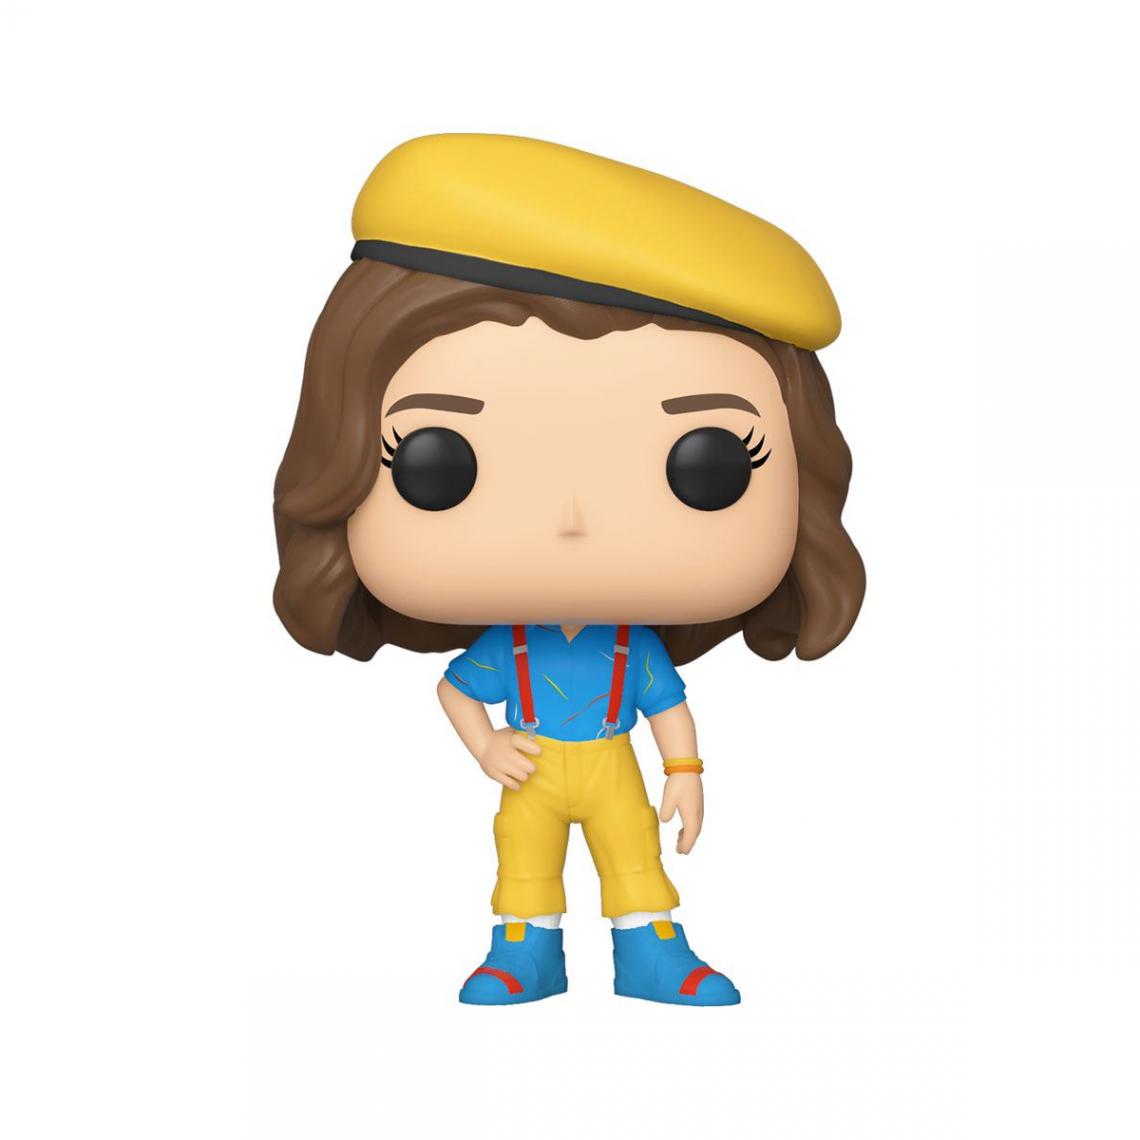 Funko - Stranger Things - Figurine POP! Eleven in Yellow Outfit 9 cm - Films et séries